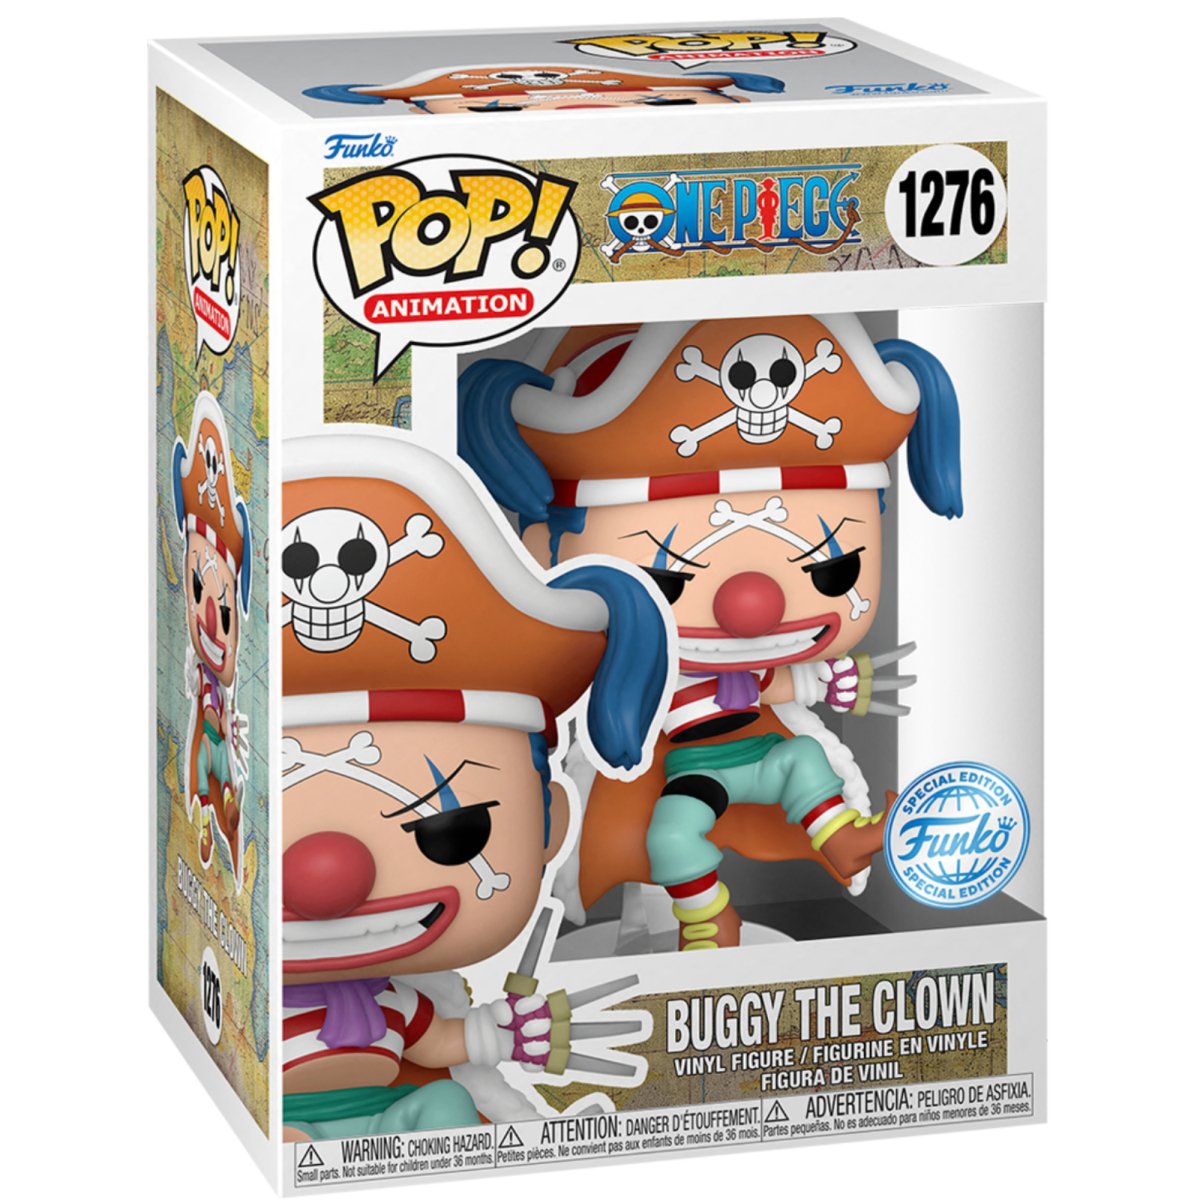 One Piece - Buggy The Clown (Special Edition) #1276 - Funko Pop! Vinyl Anime - Persona Toys